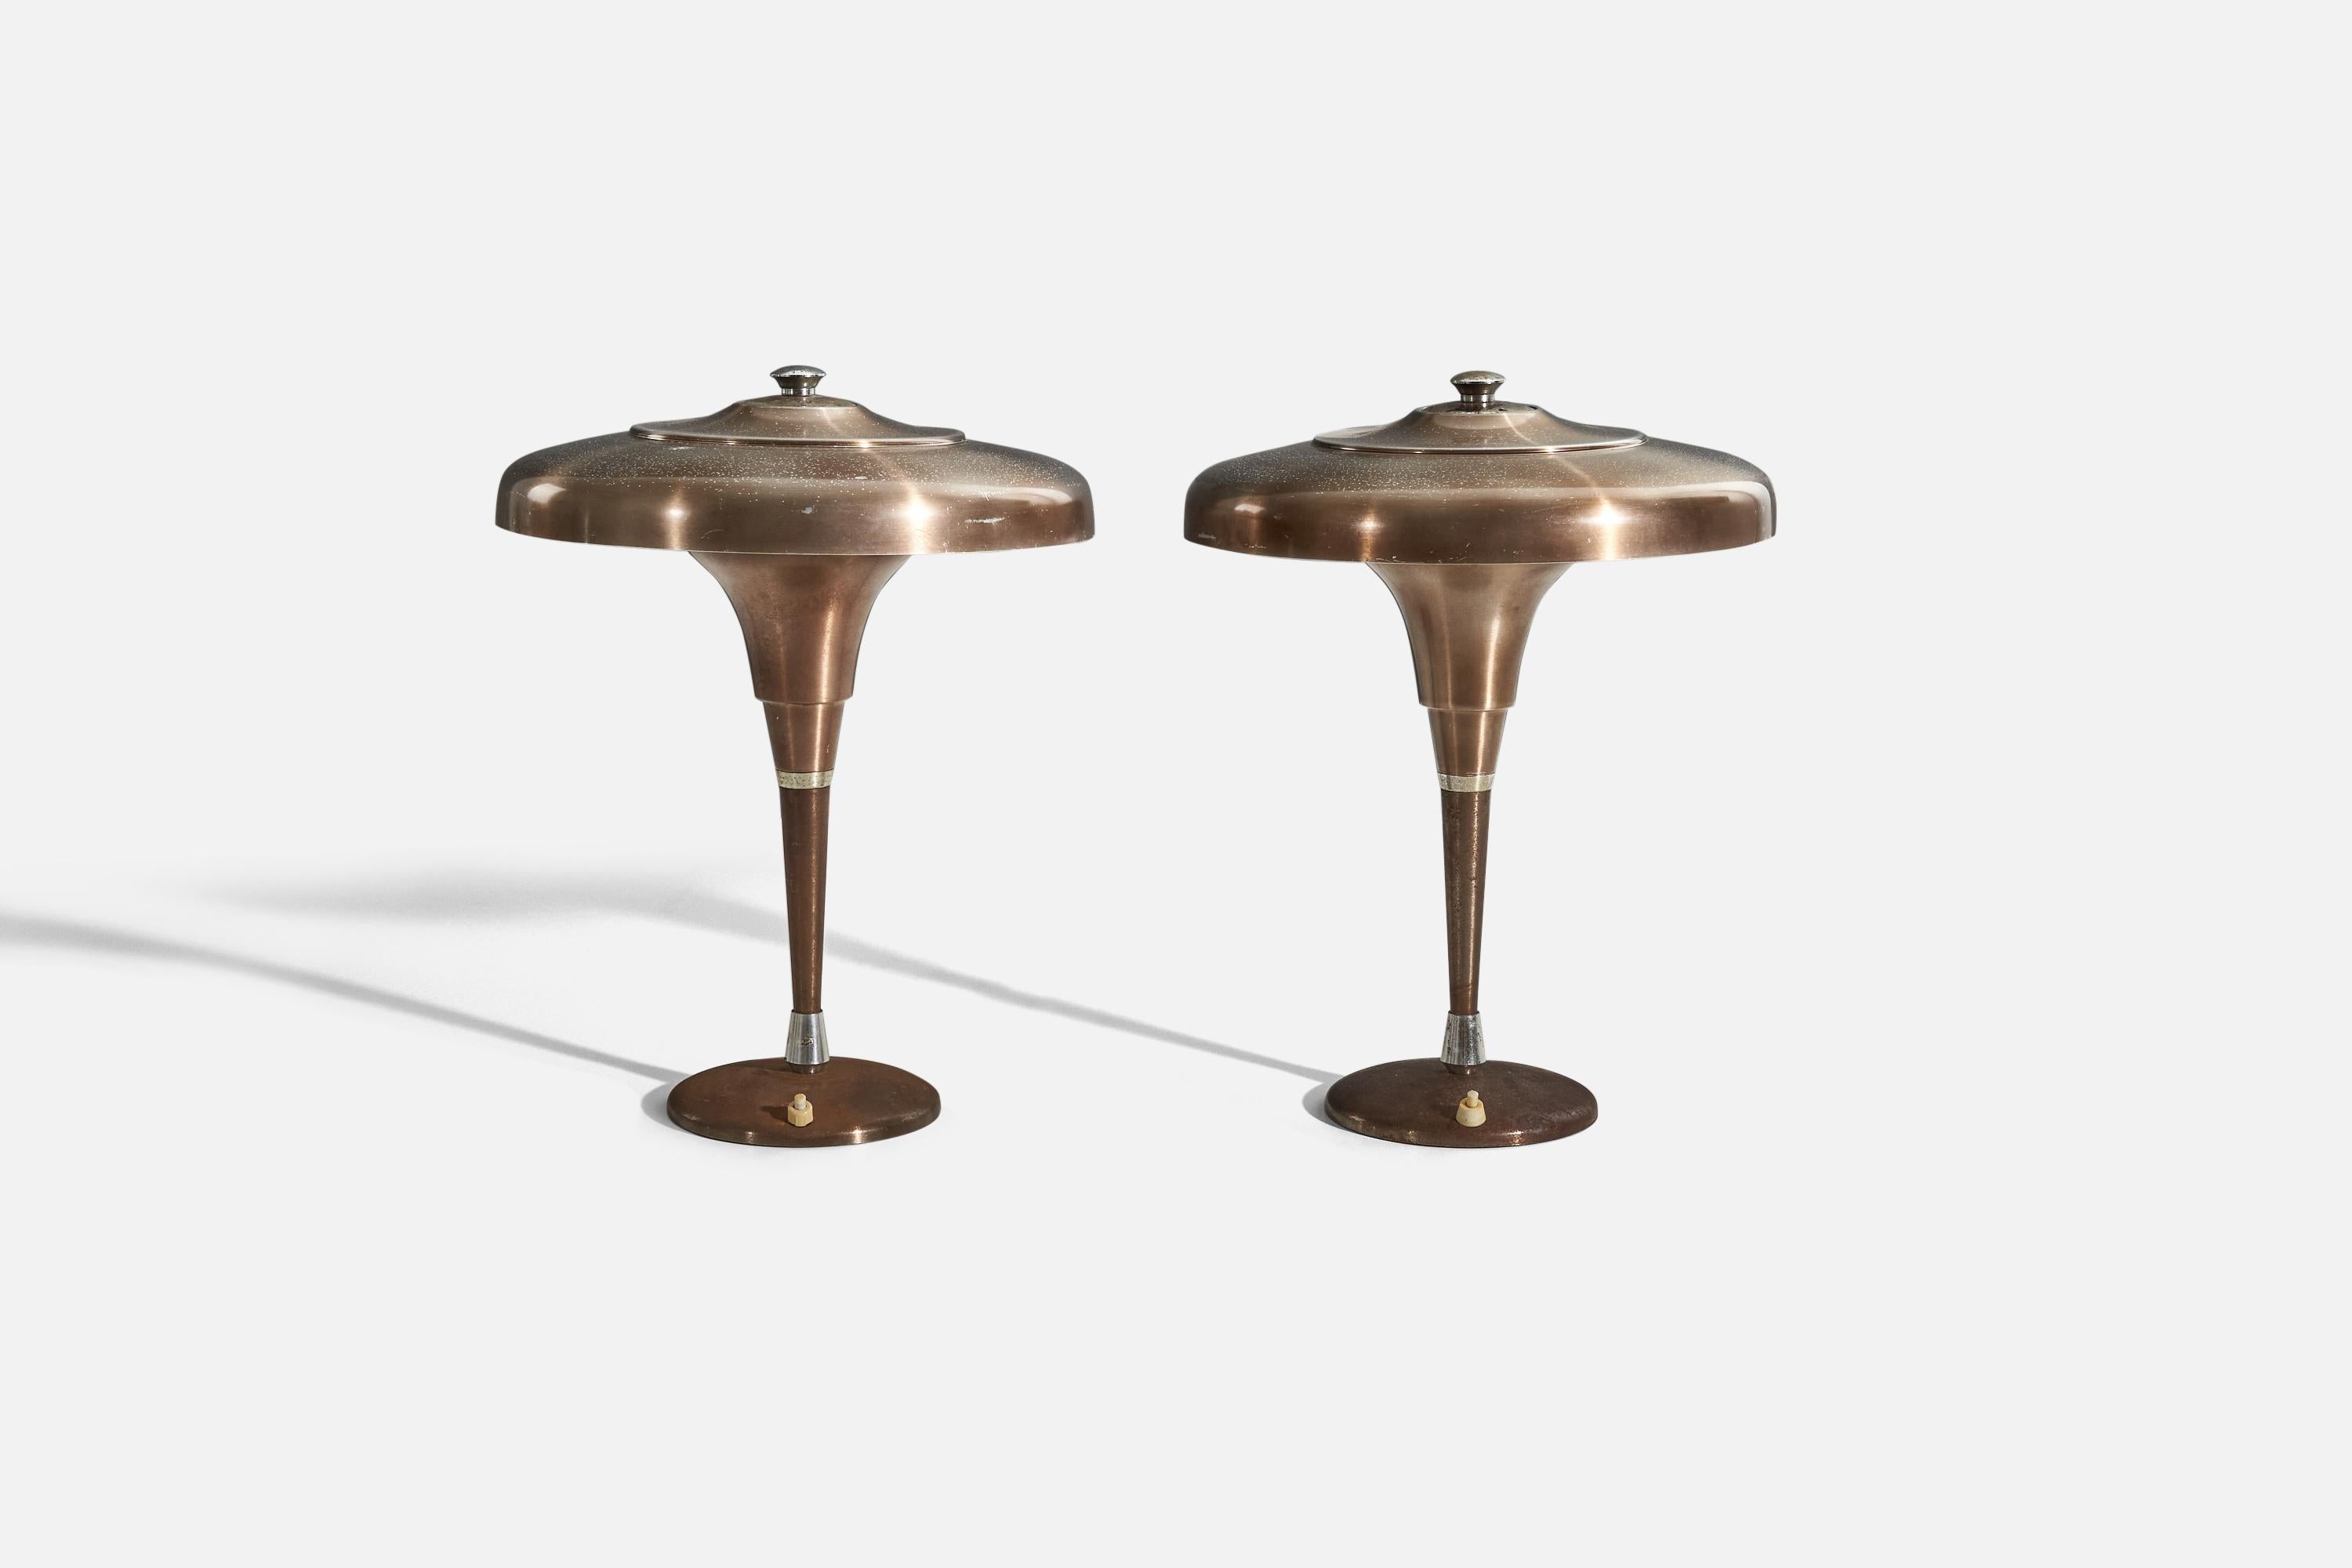 A pair of brass table lamps designed and produced in Italy, c. 1940s.